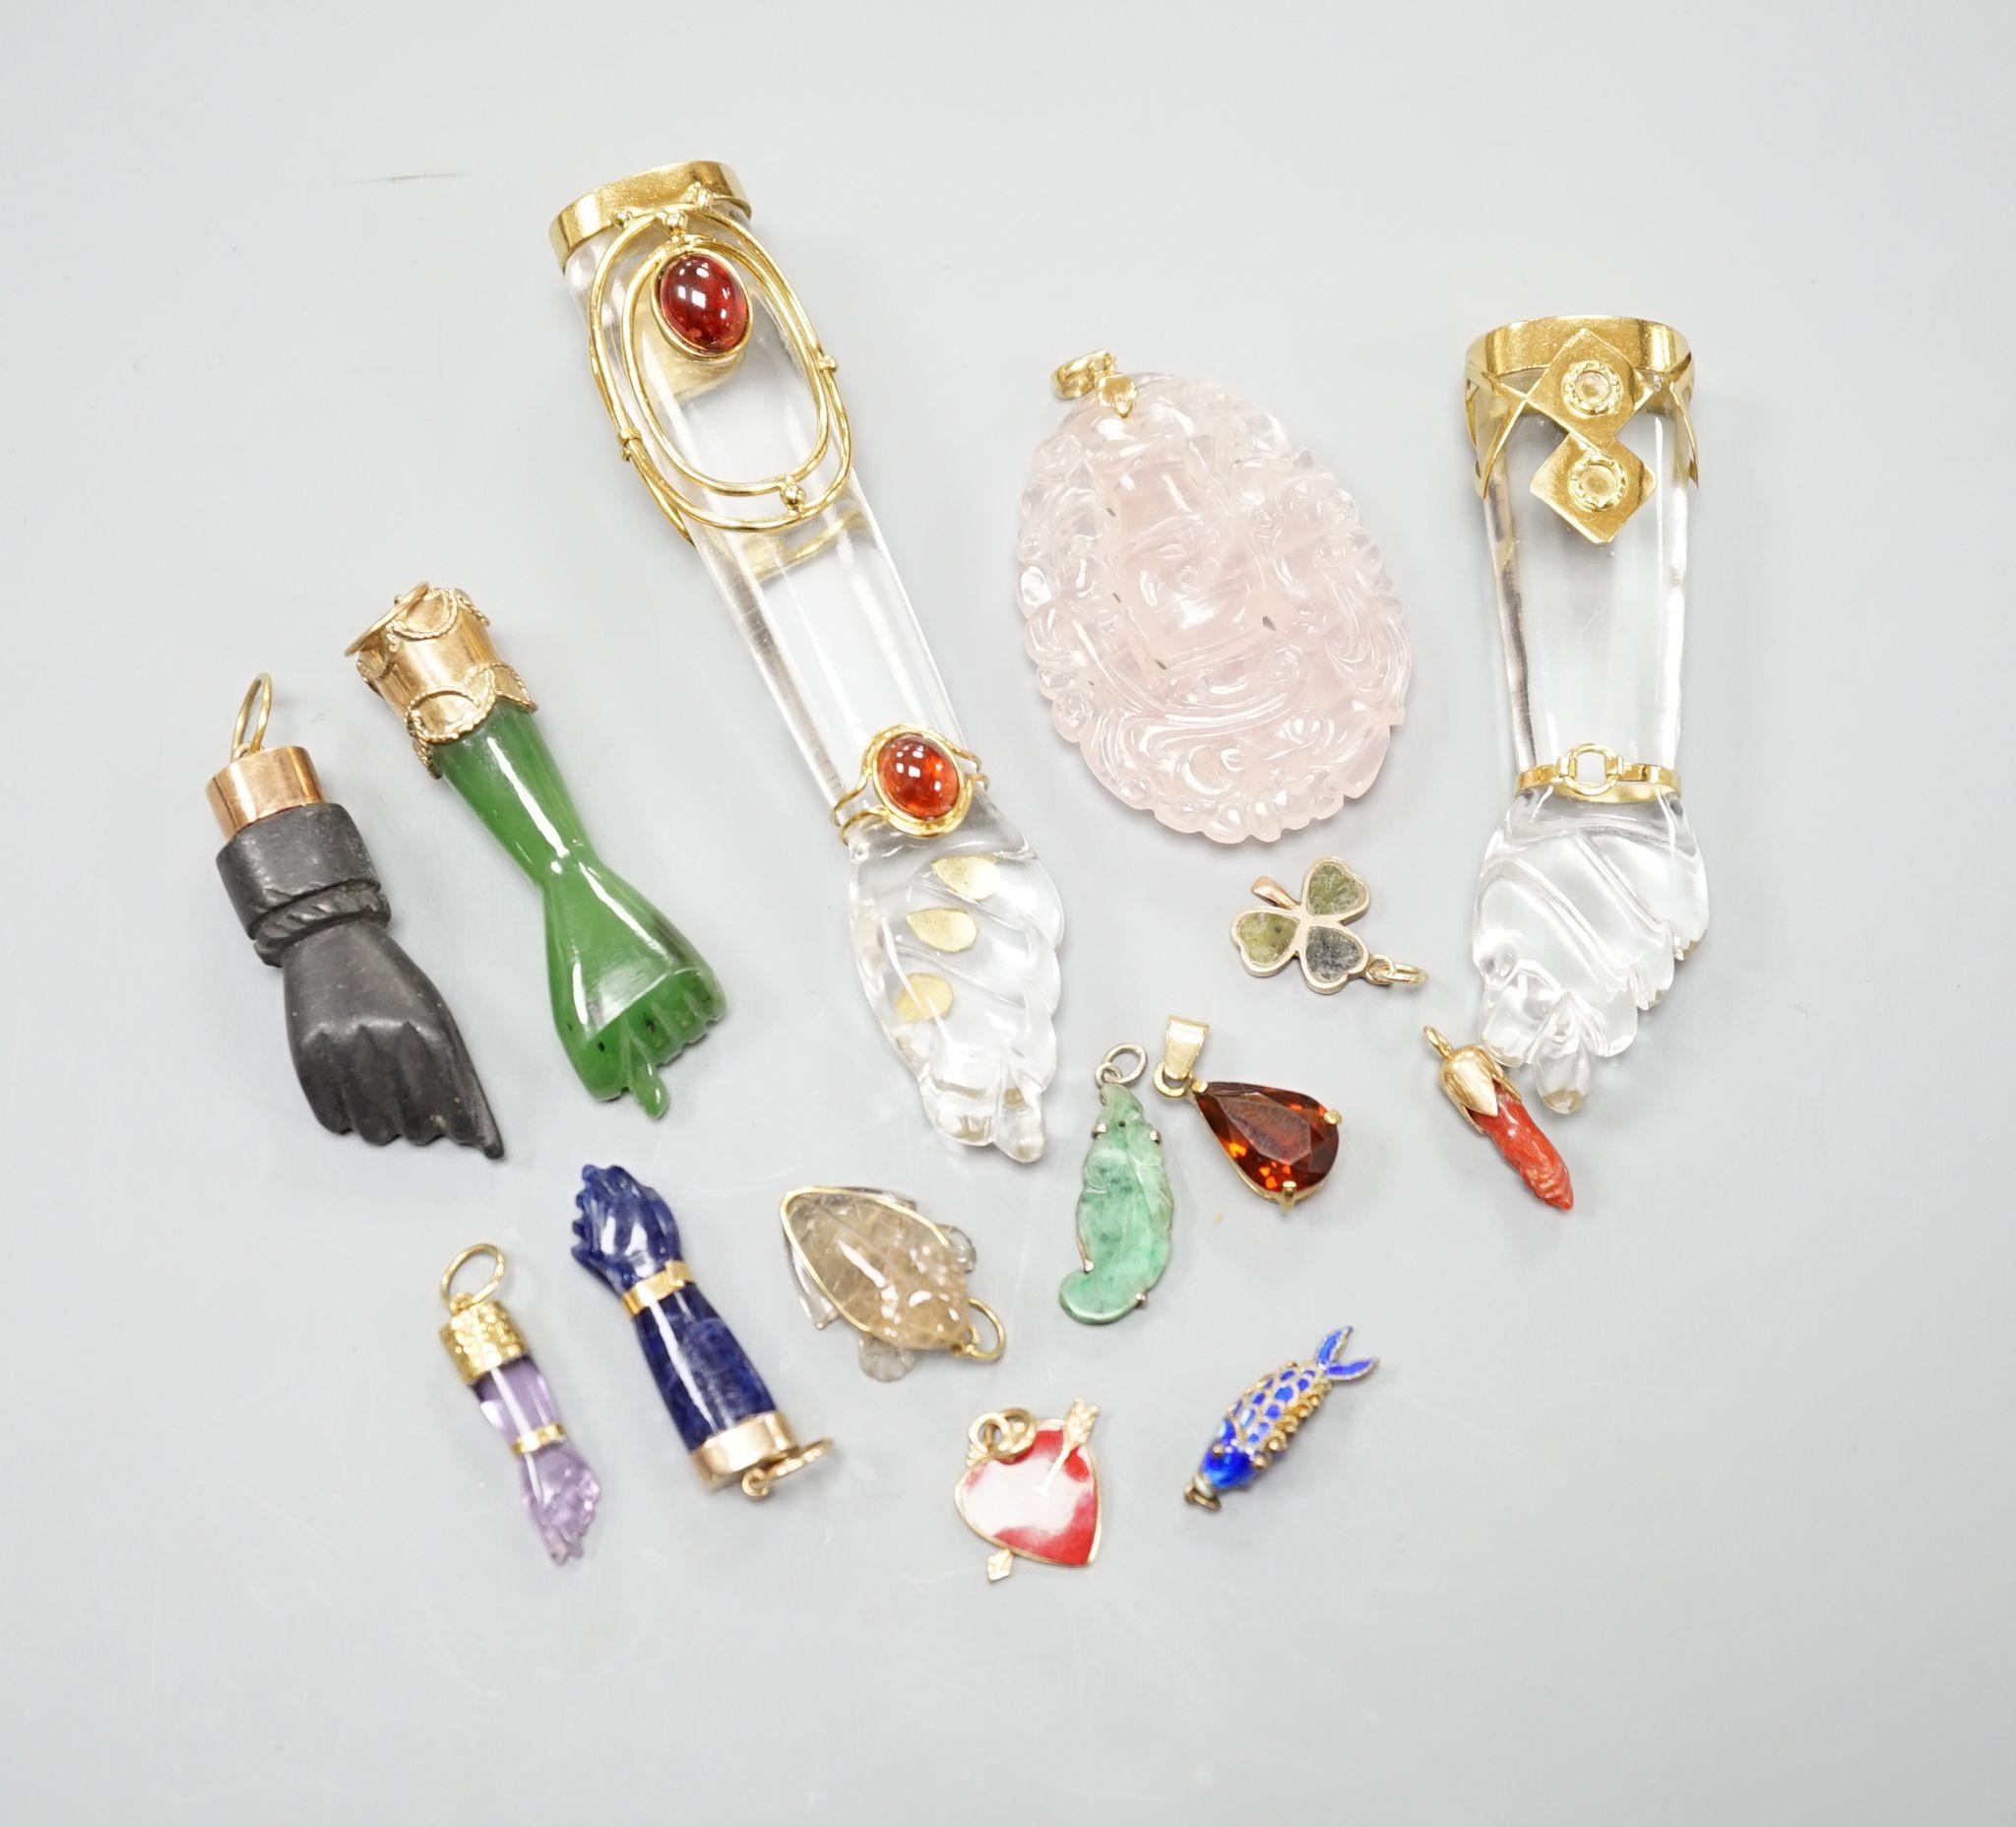 Seven assorted yellow metal or gilt metal mounted clasped hand charm or pendants, largest, 94mm, and seven other smaller charms/pendants including 14k and red enamel heart and an enamelled articulated fish.